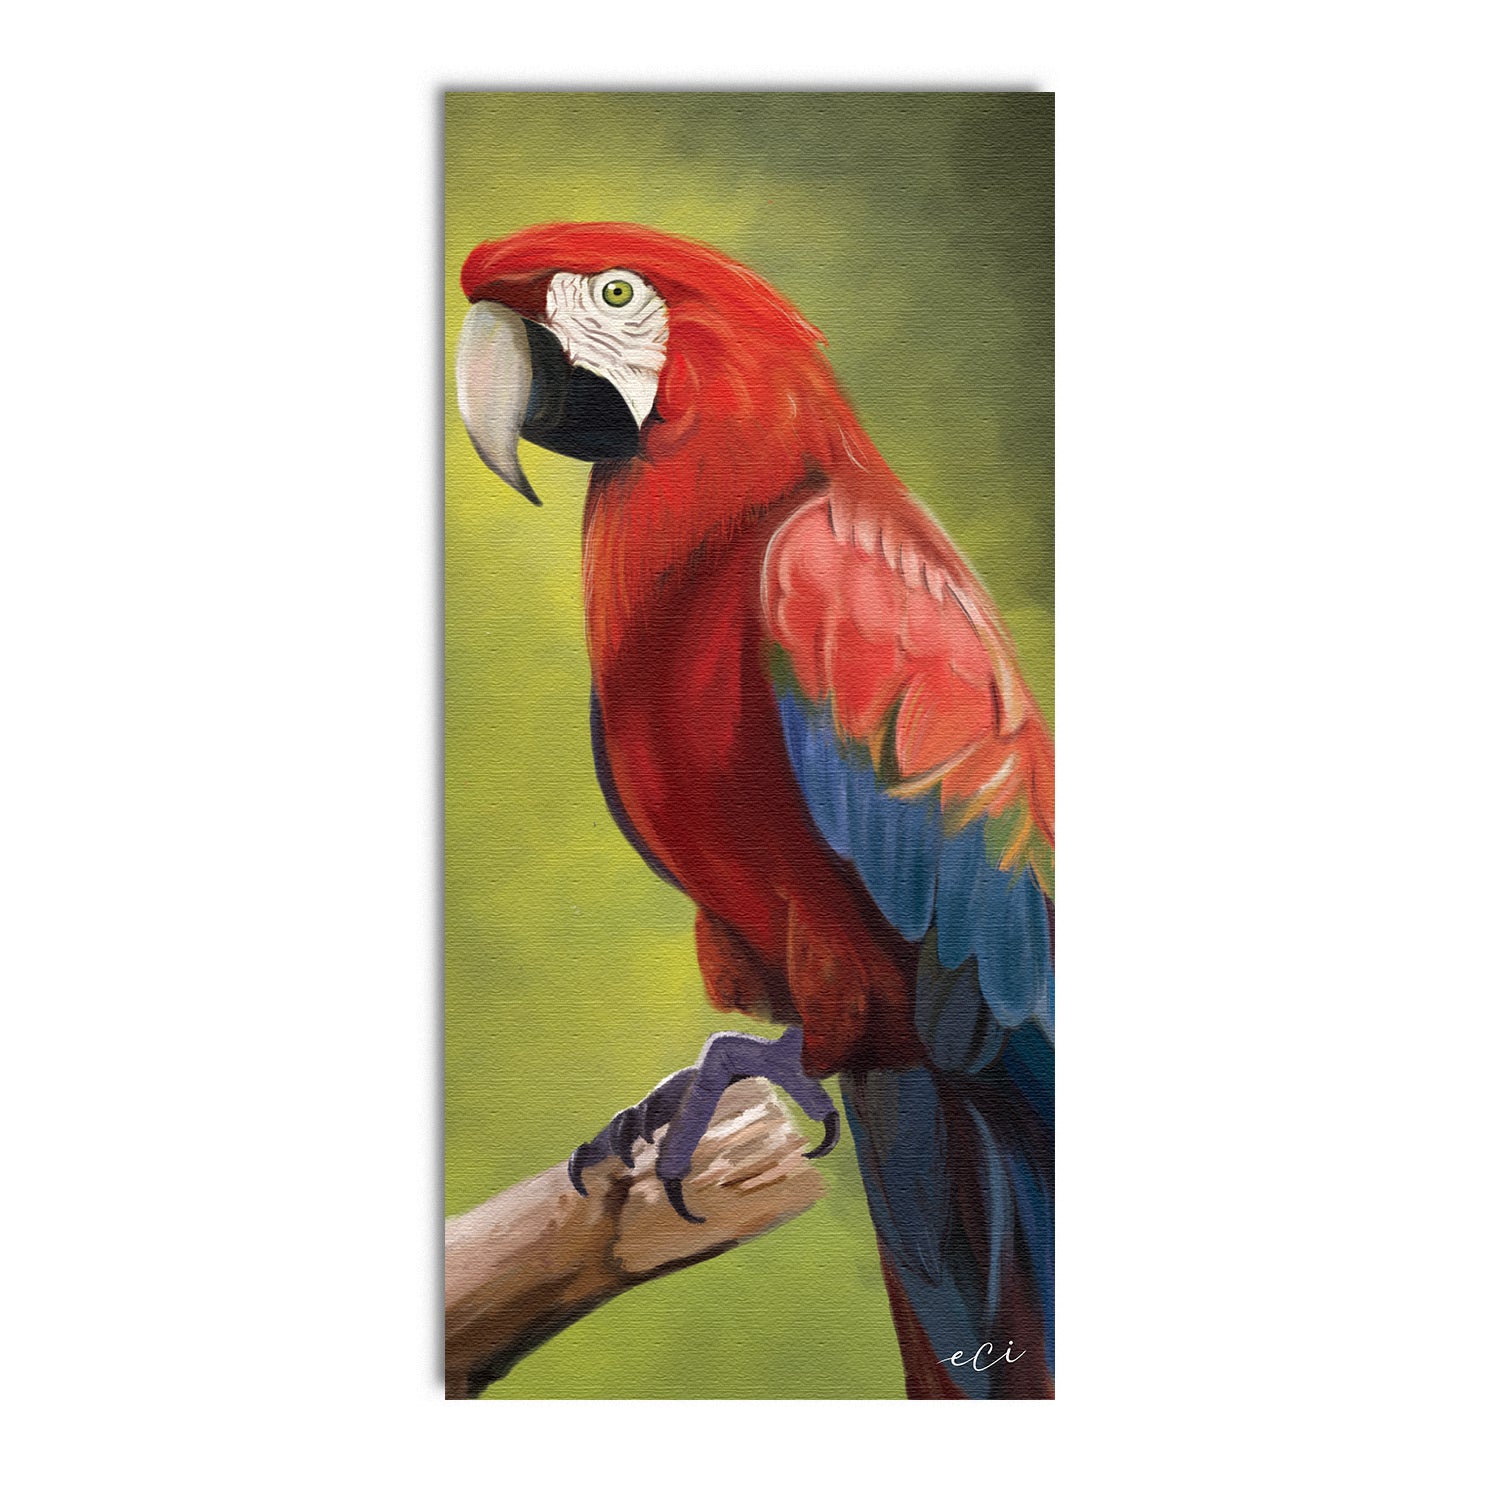 Parrot On Tree Branch Canvas Painting Digital Printed Bird Wall Art 2